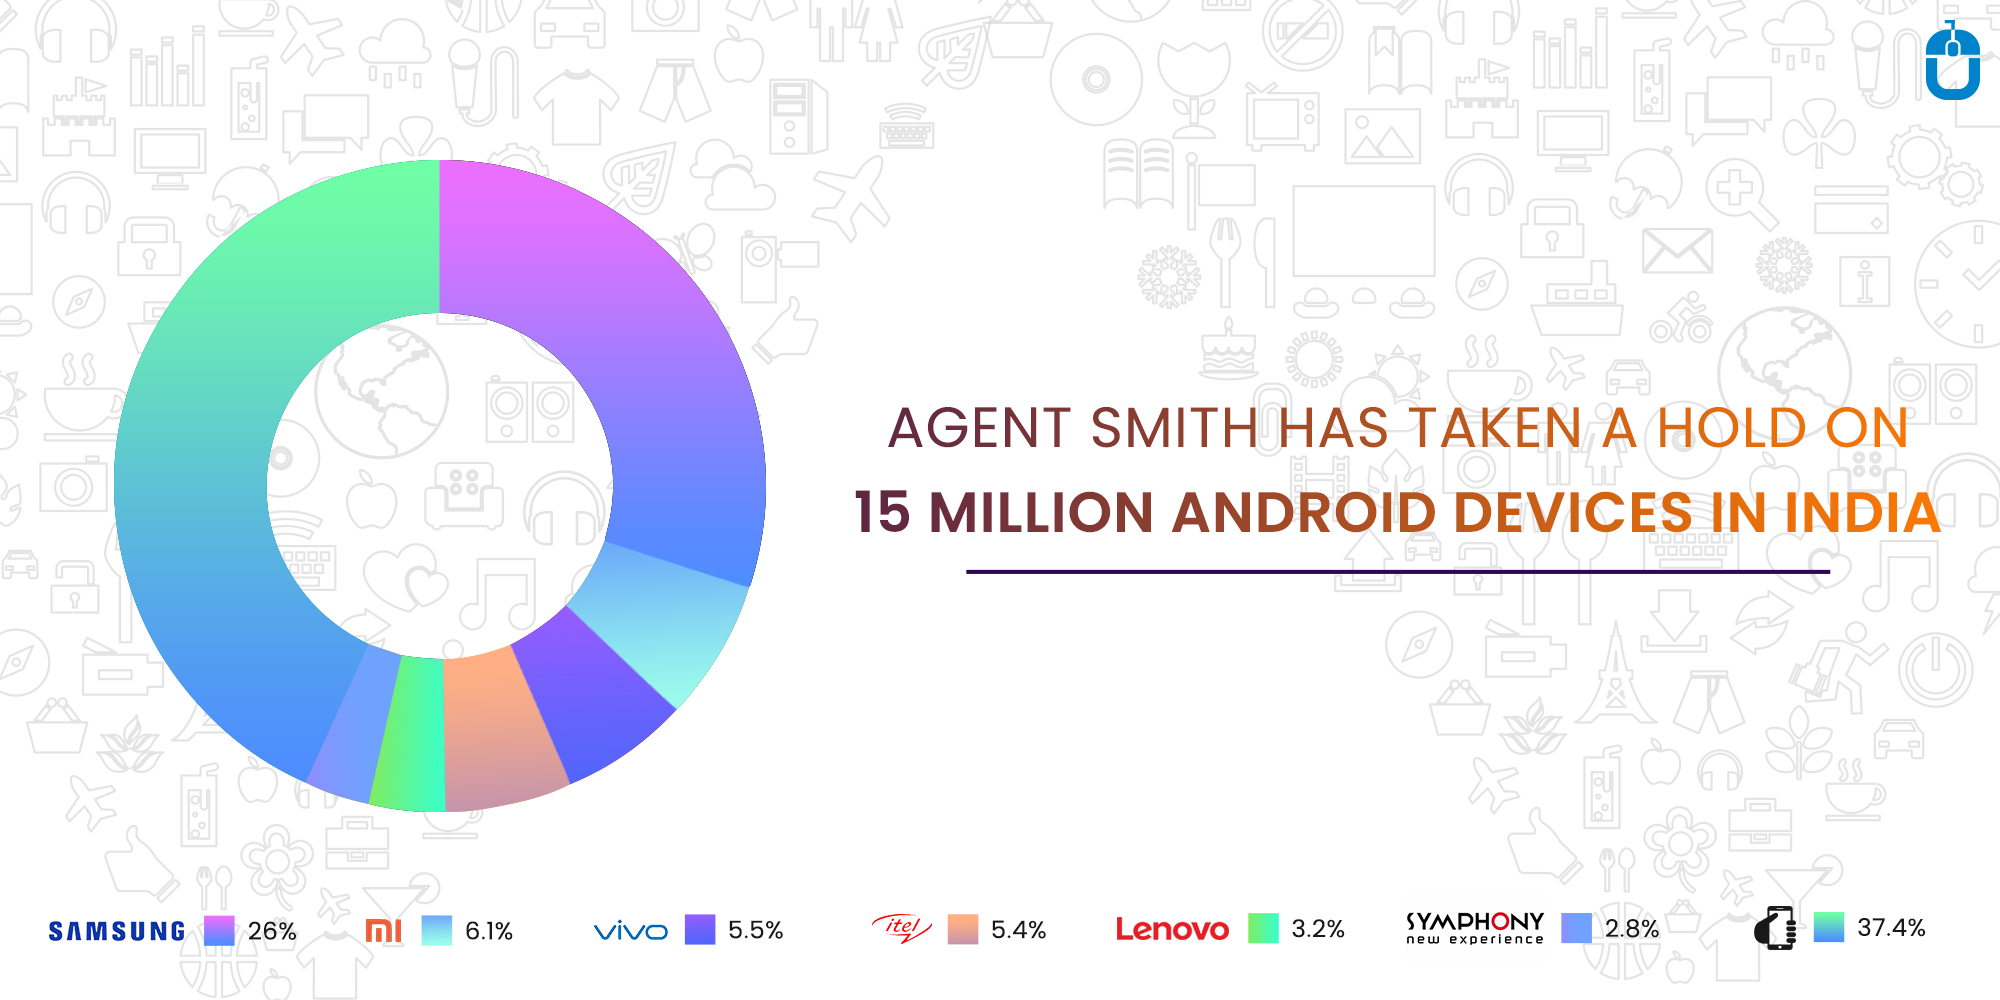 Agent Smith Has Taken A Hold On 15 Million Android Devices In India